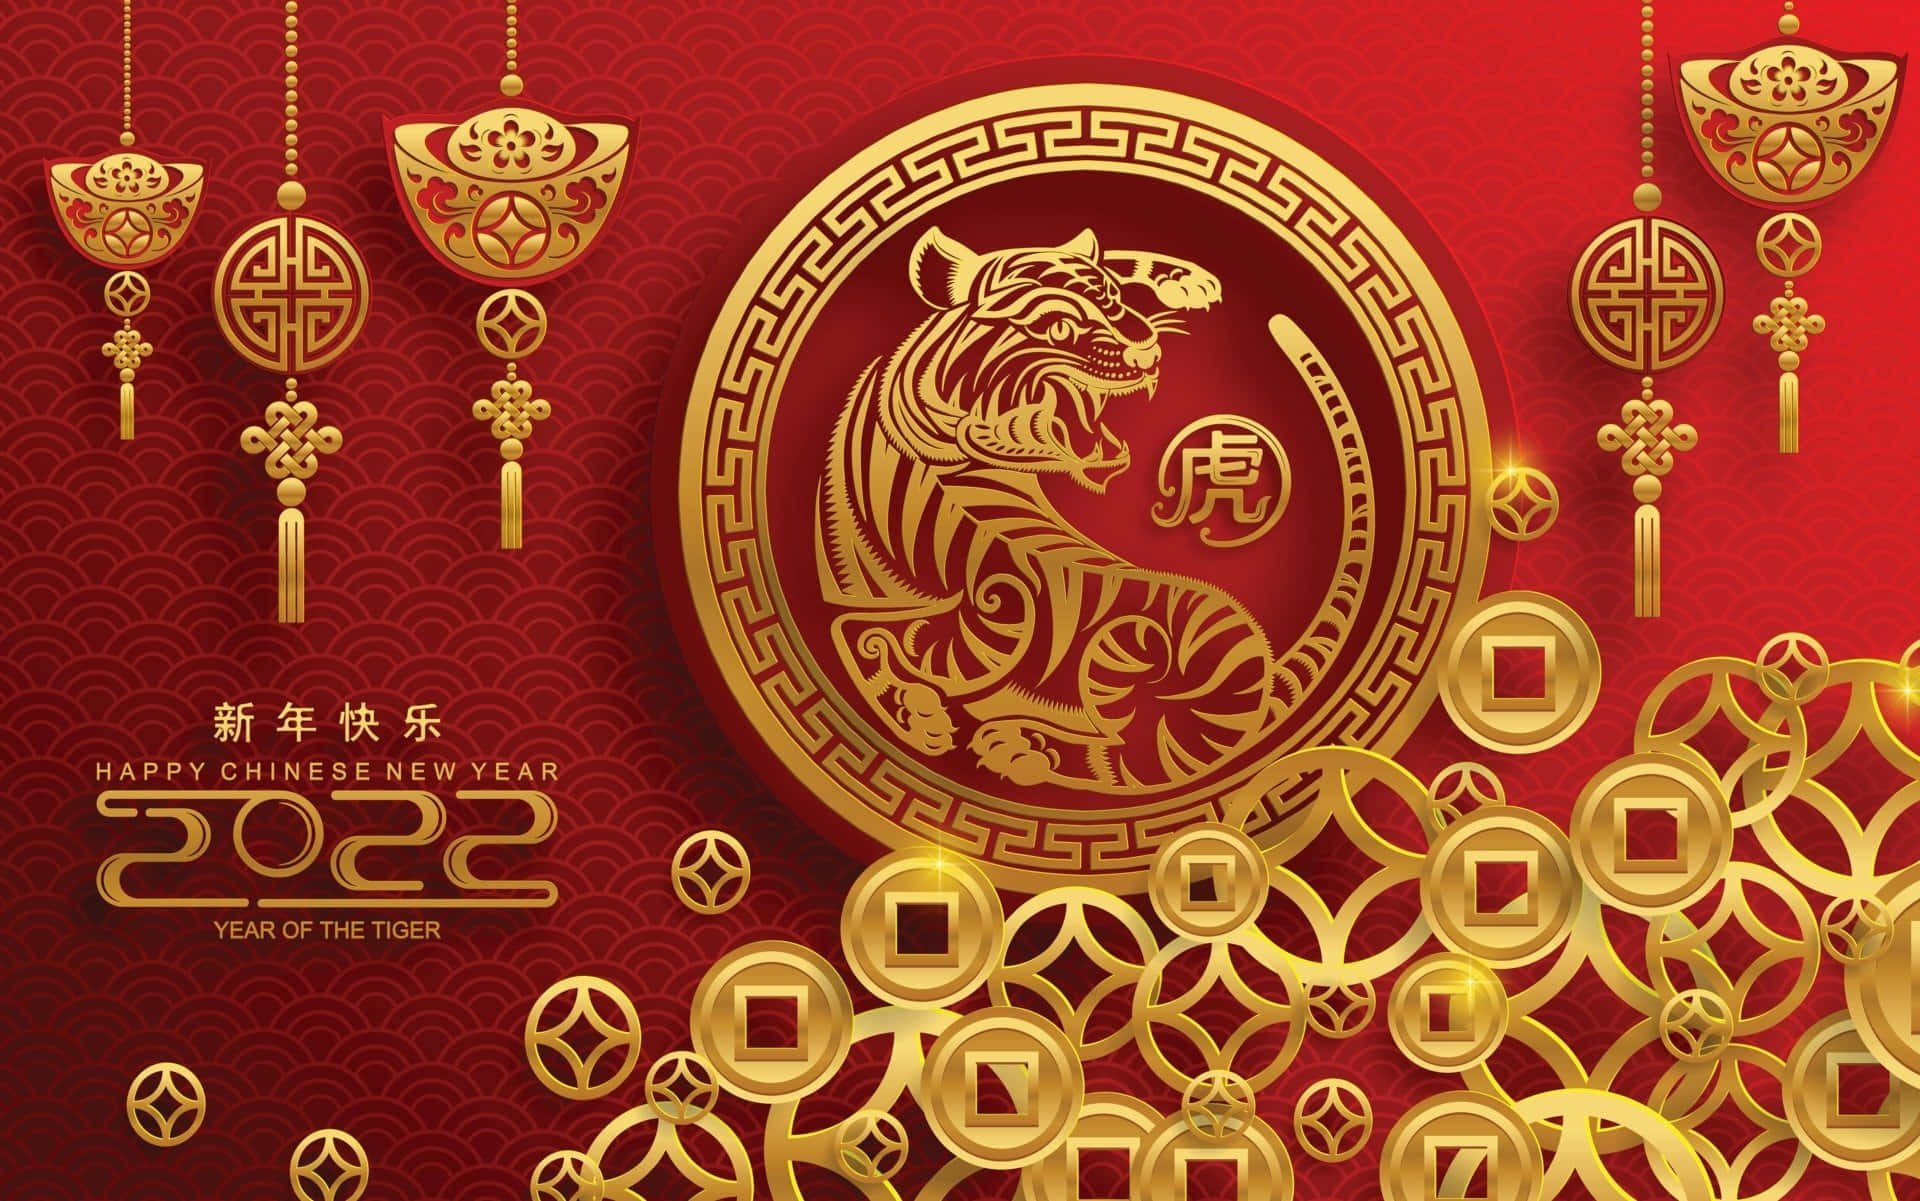 Chinese New Year 2020 With Gold Decorations And Tiger